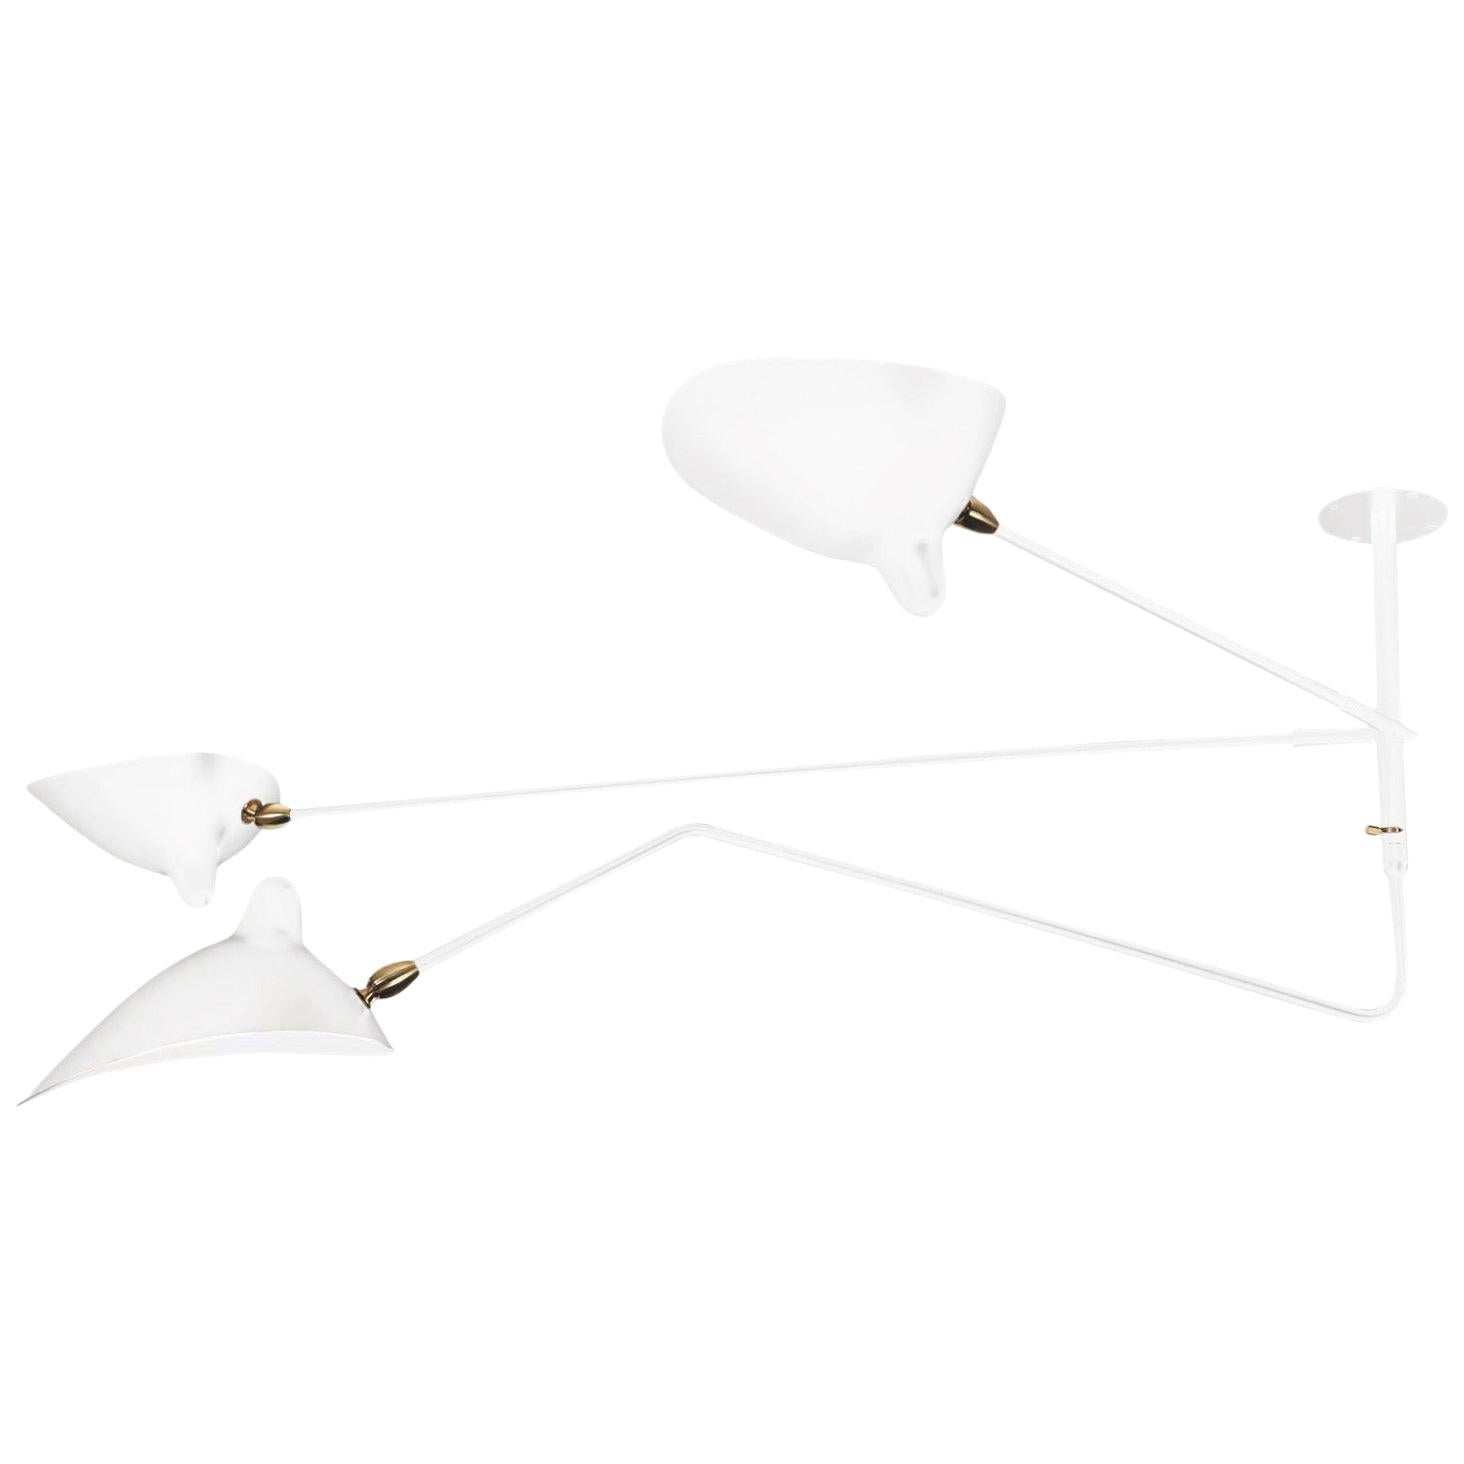 Serge Mouille White "Suspension" Two Fixed and One Rotating Curved Arm Lamp